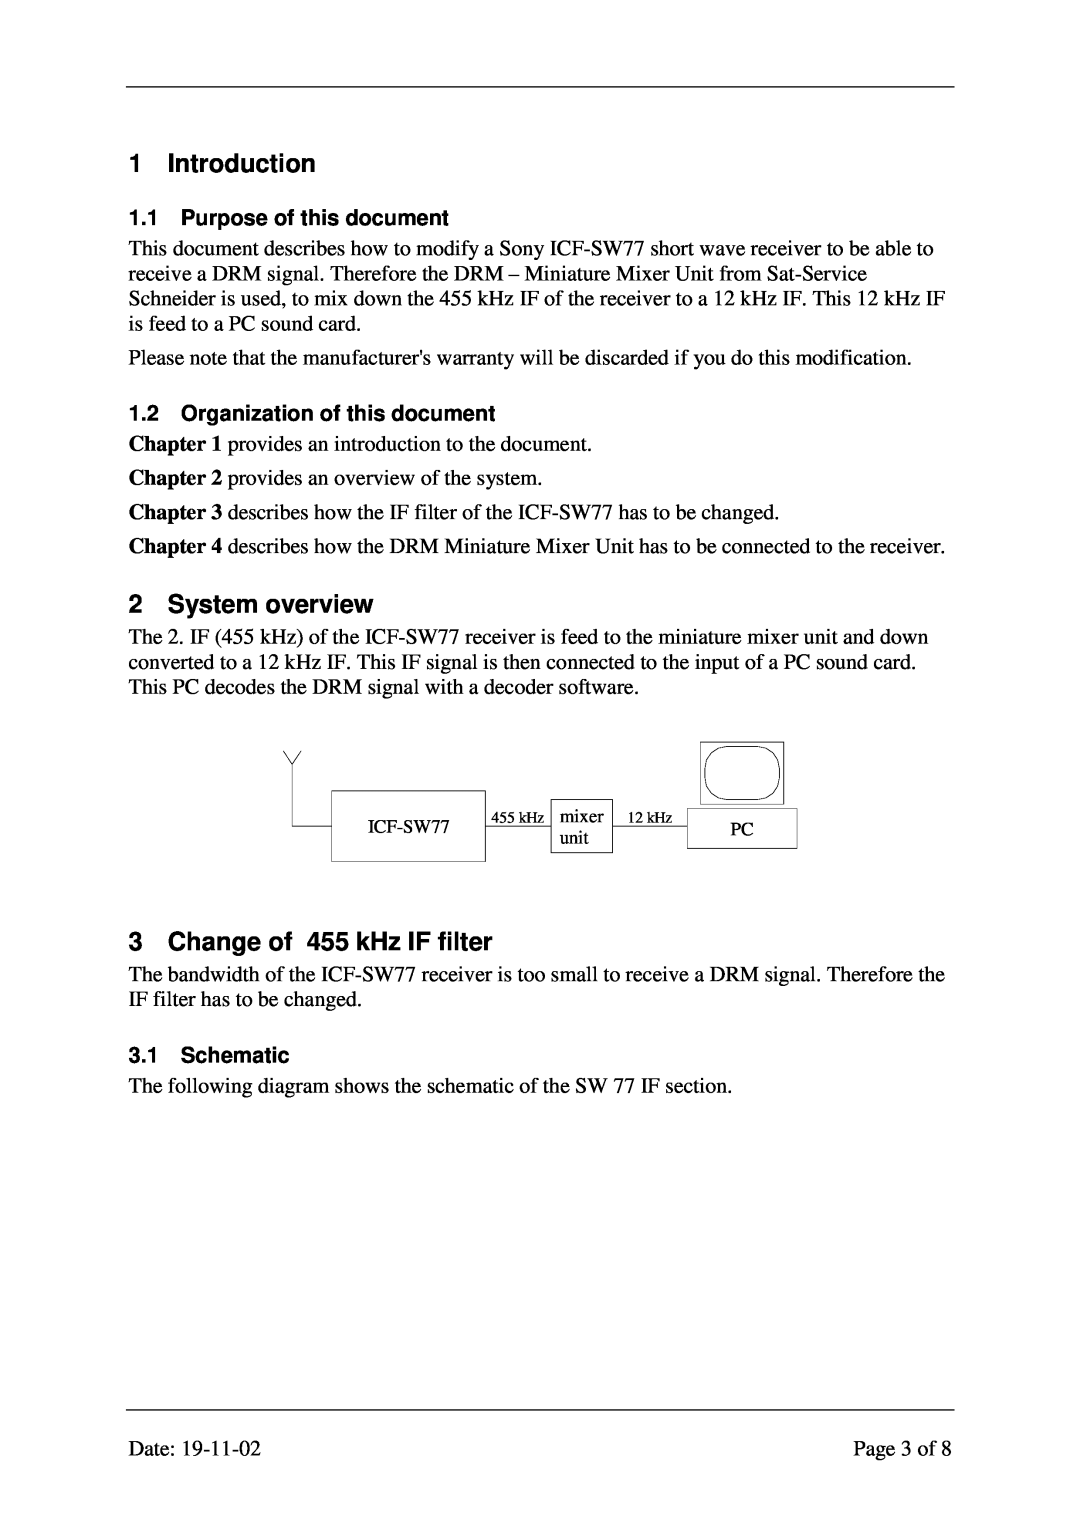 Sony ICF-SW77 manual Introduction, System overview, Change of 455 kHz IF filter, 1.1Purpose of this document, 3.1Schematic 